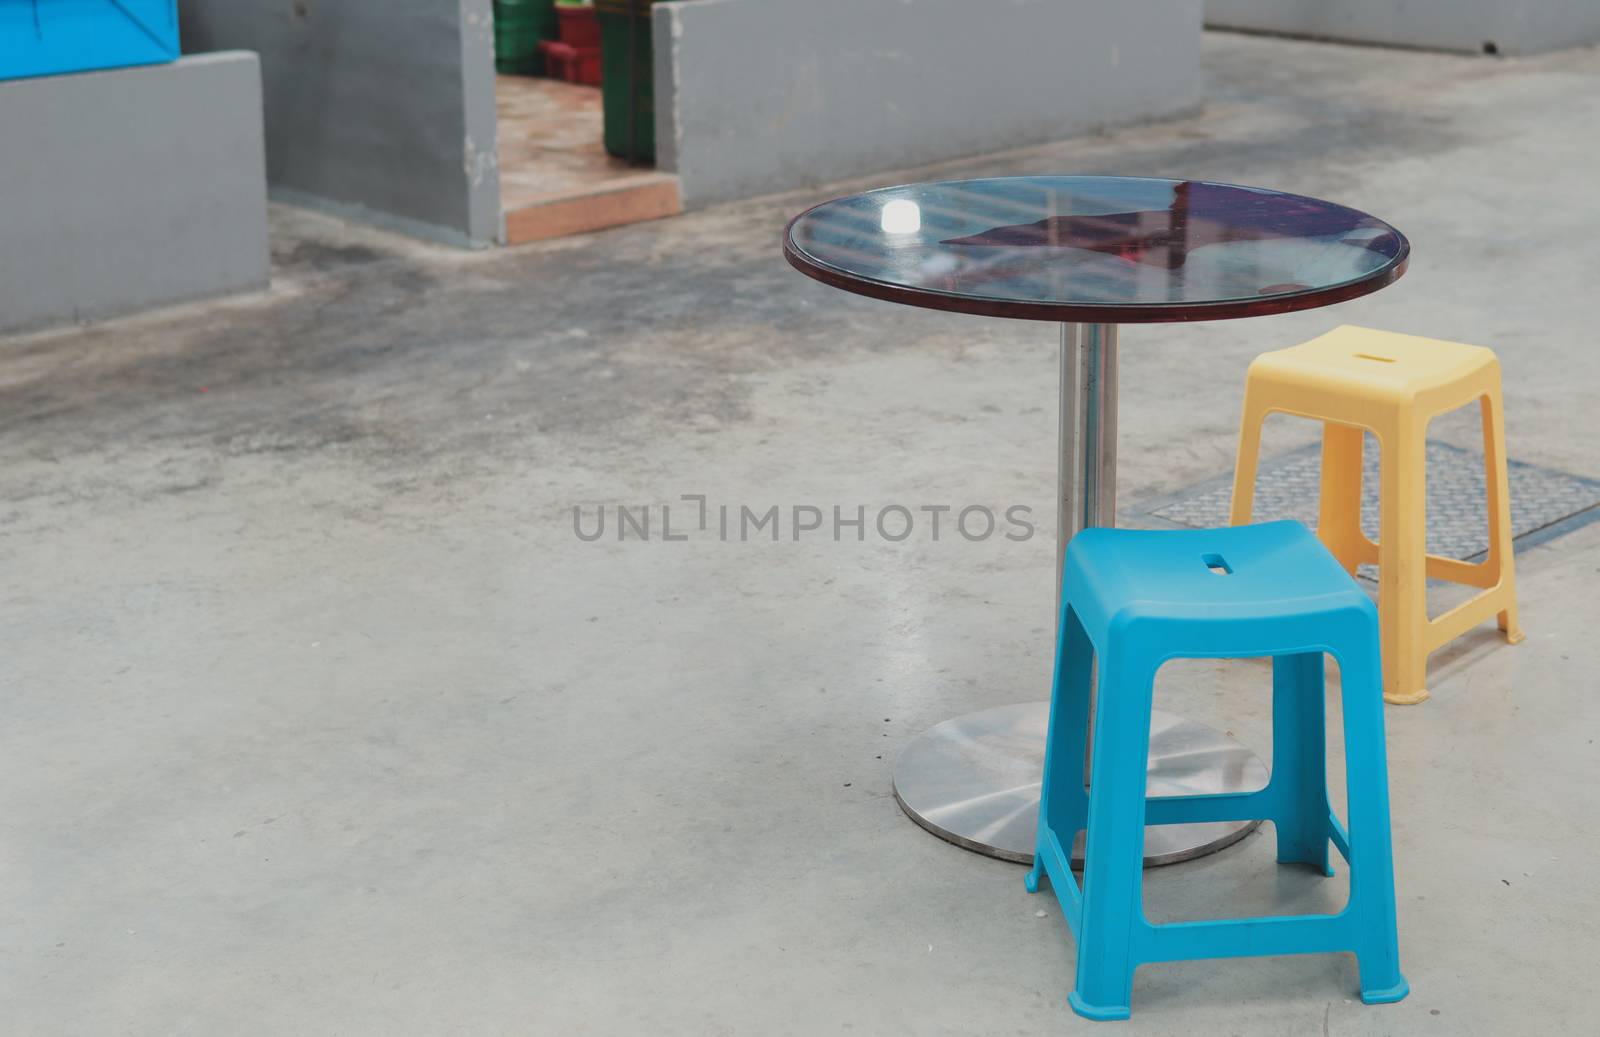 Plastic table and chair by Jarukit